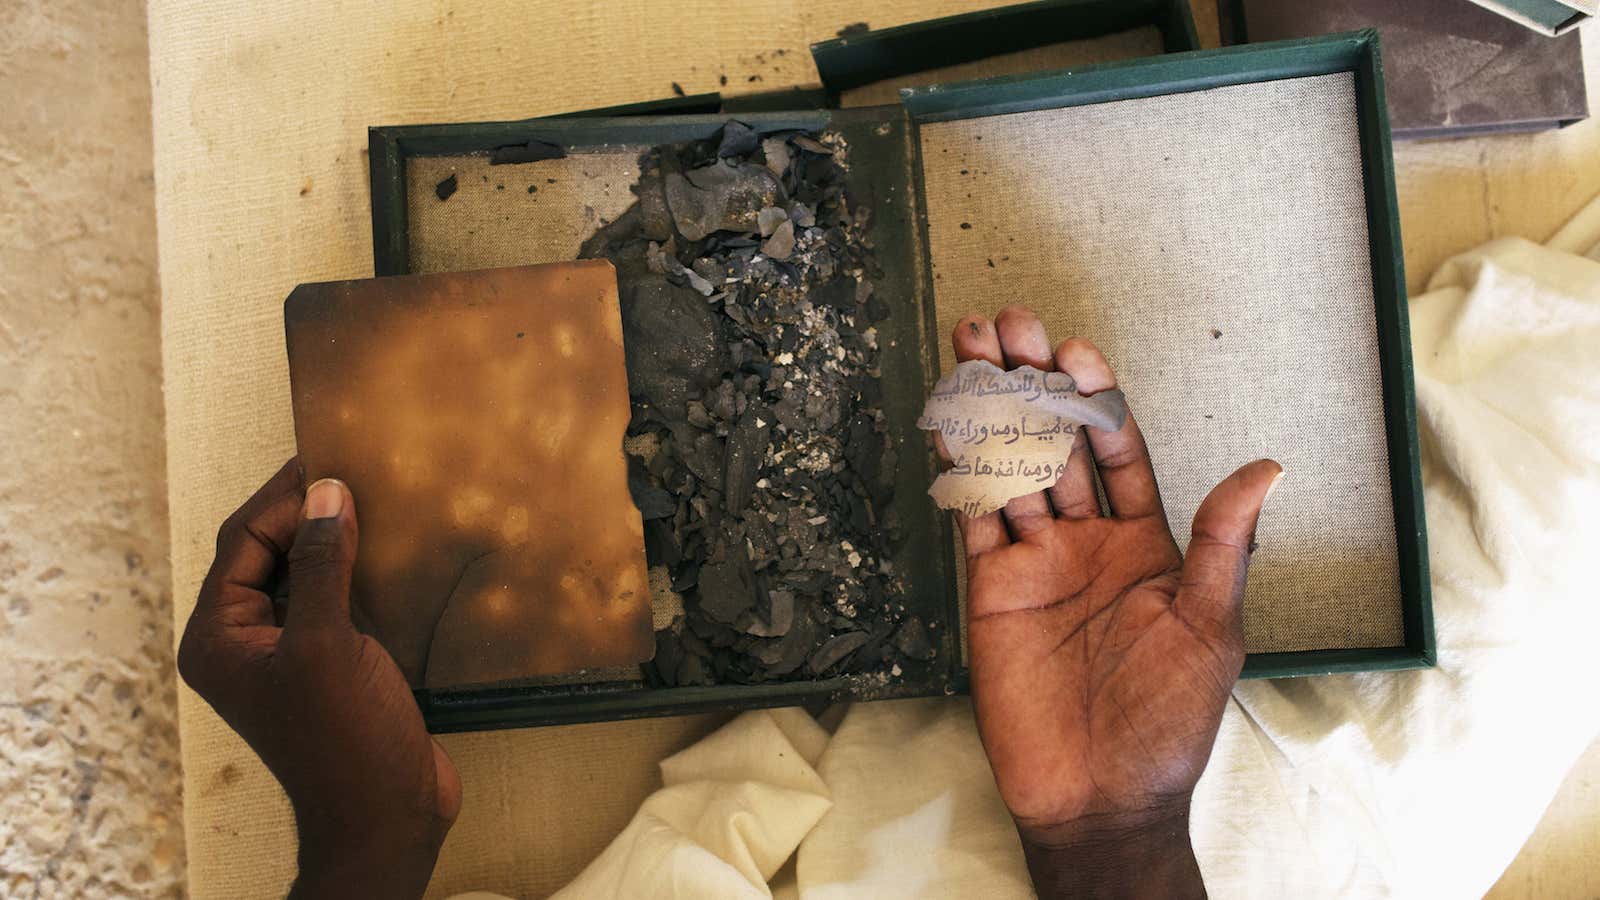 Alkanis Cisse holds the remnants of a burned Islamic manuscript at the Ahmed Baba Centre for Islamic learning in Timbuktu July 25, 2013. About 4,000…